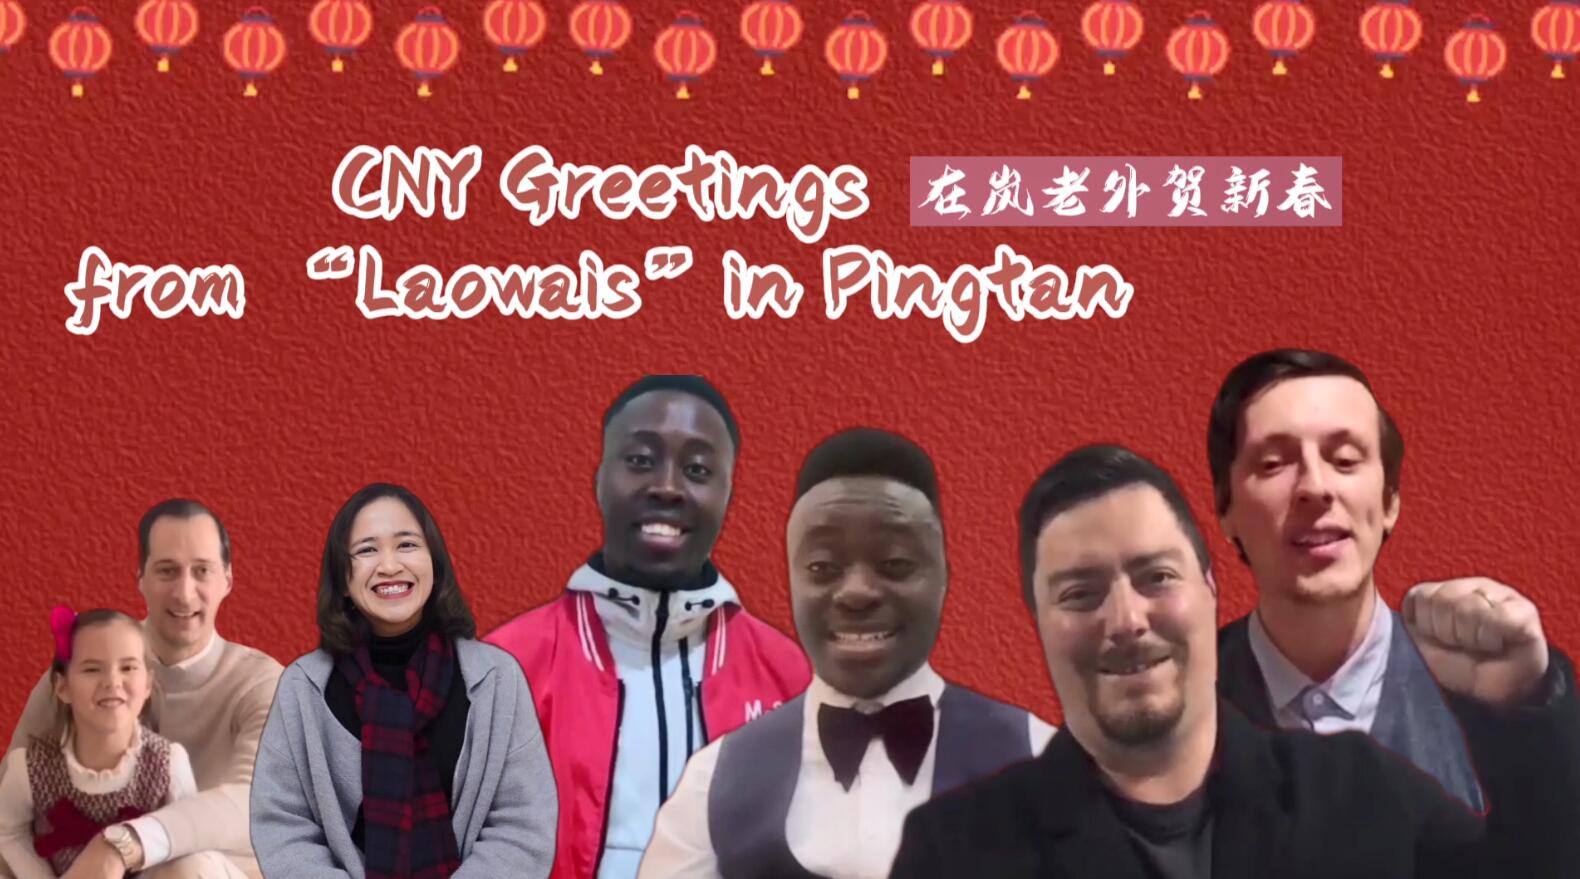 CNY greetings from 